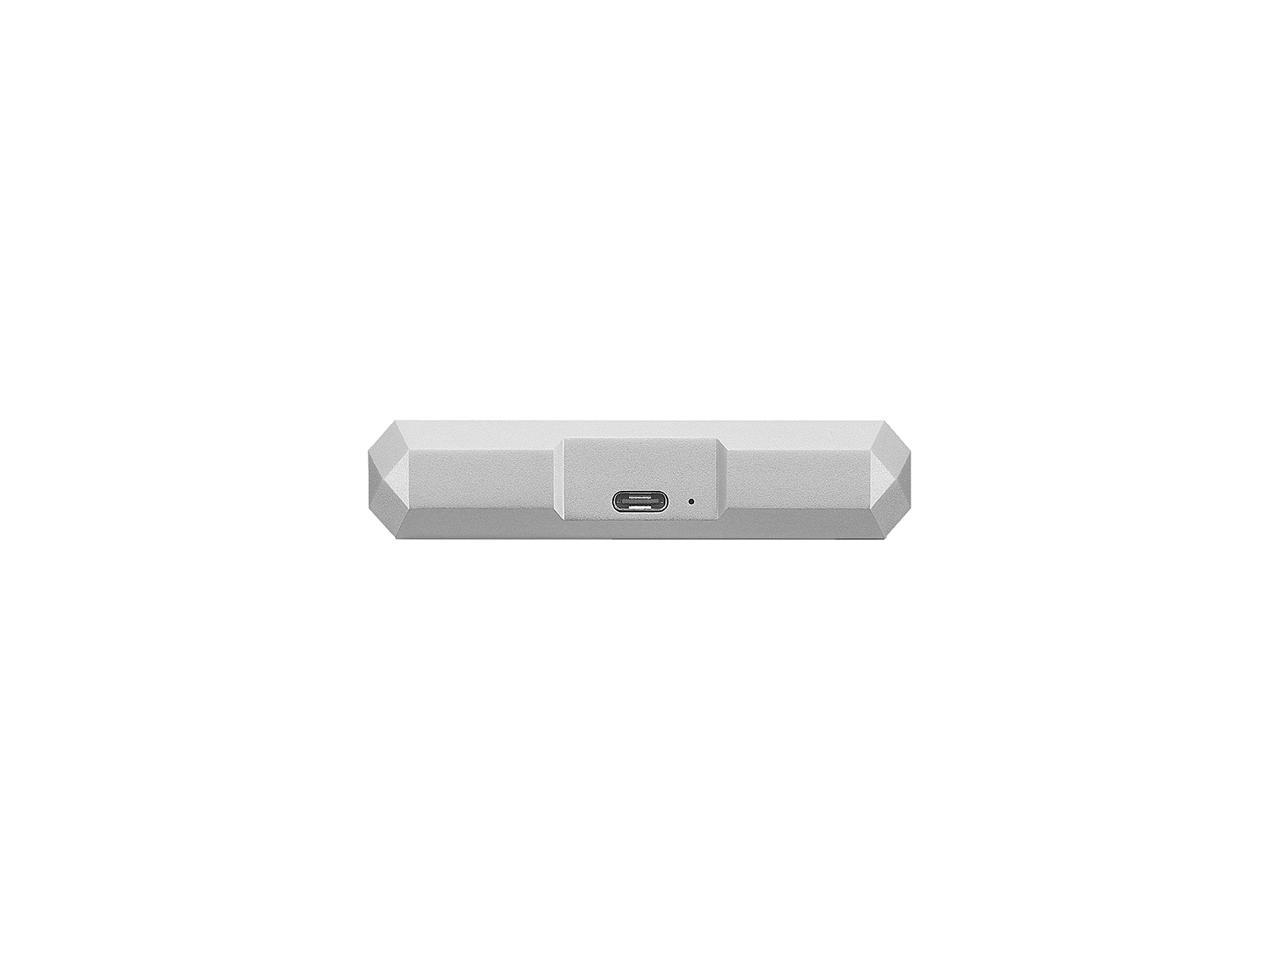 Lacie Mobile Drive 4Tb External Hard Drive Portable Hdd - Moon Silver Usb-C Usb 3.0, For Mac And Pc Desktop, 1 Month Adobe Cc (Sthg4000400)